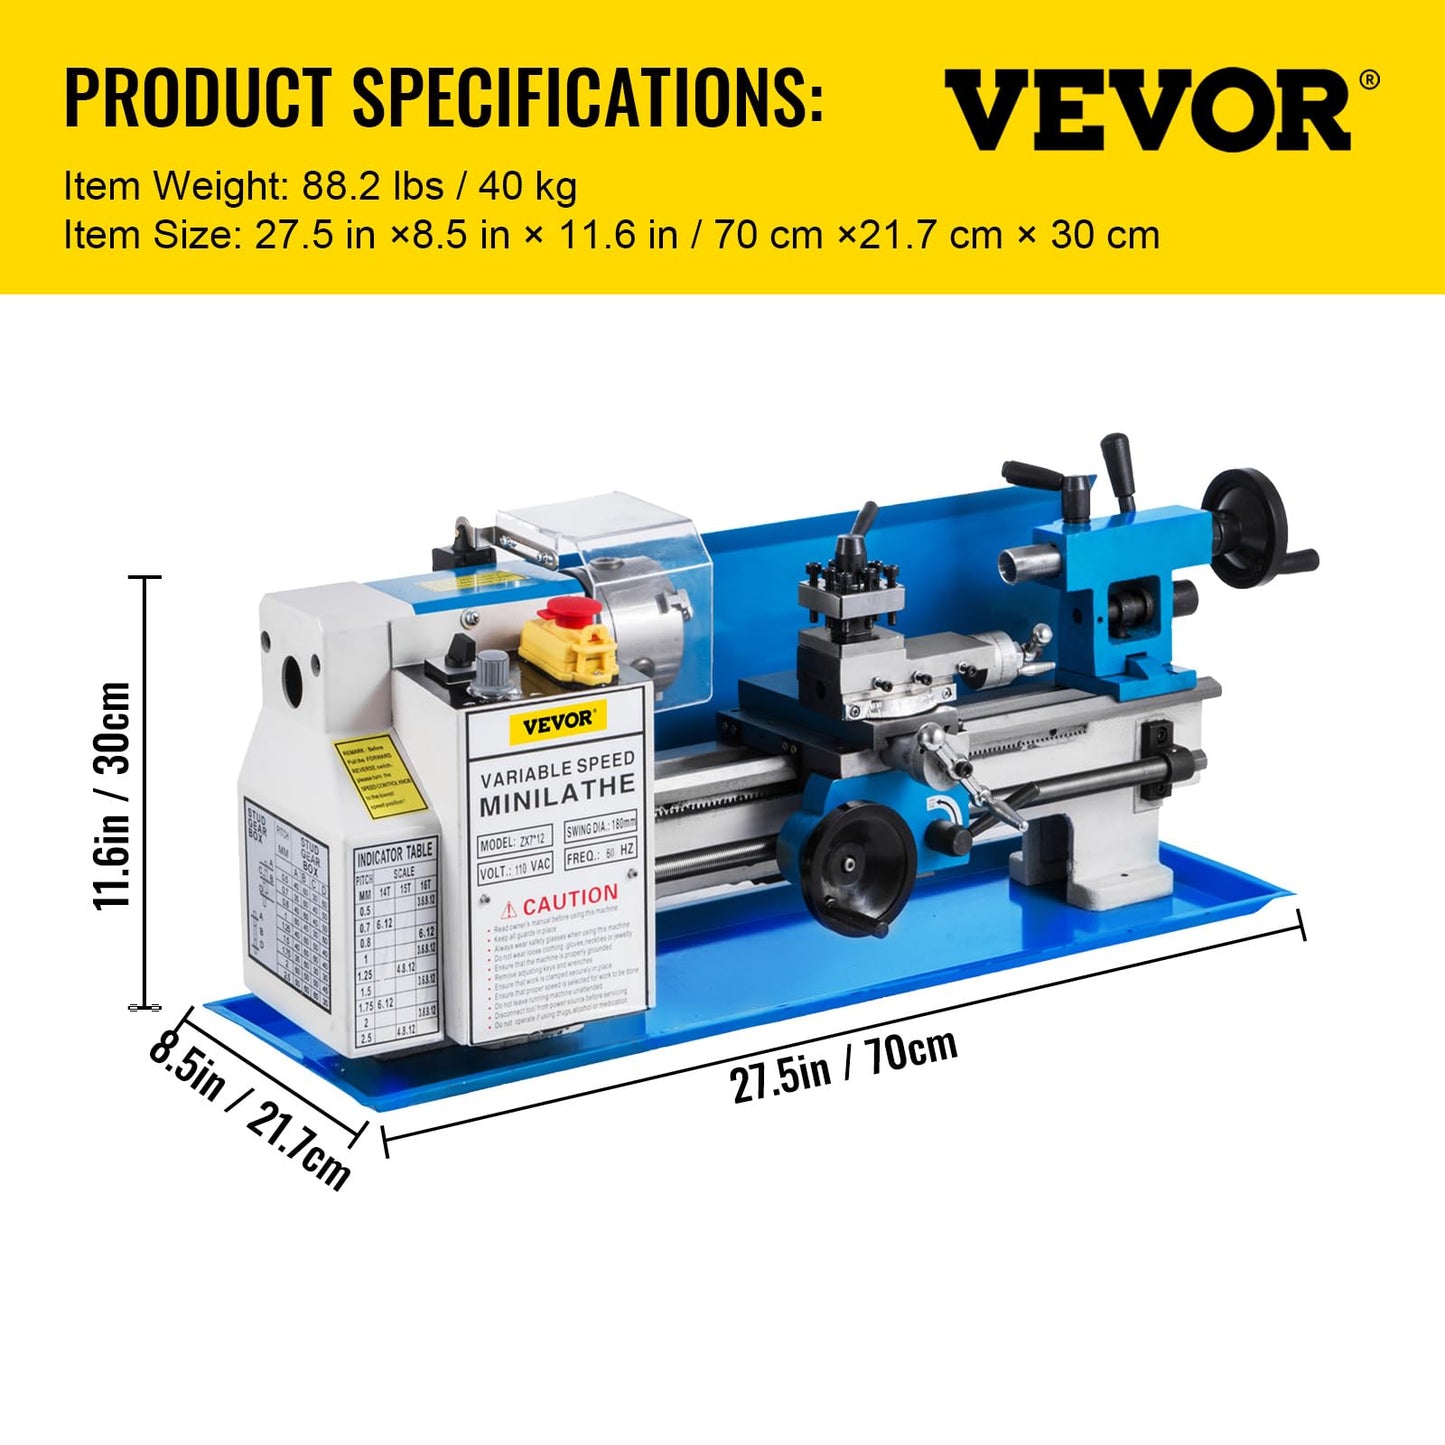 VEVOR Metal Lathe 7"x12",Precision Bench Top Mini Metal Lathe 550W, Metal Lathe Variable Speed 50-2500 RPM Nylon Gear With A Movable Lamp for